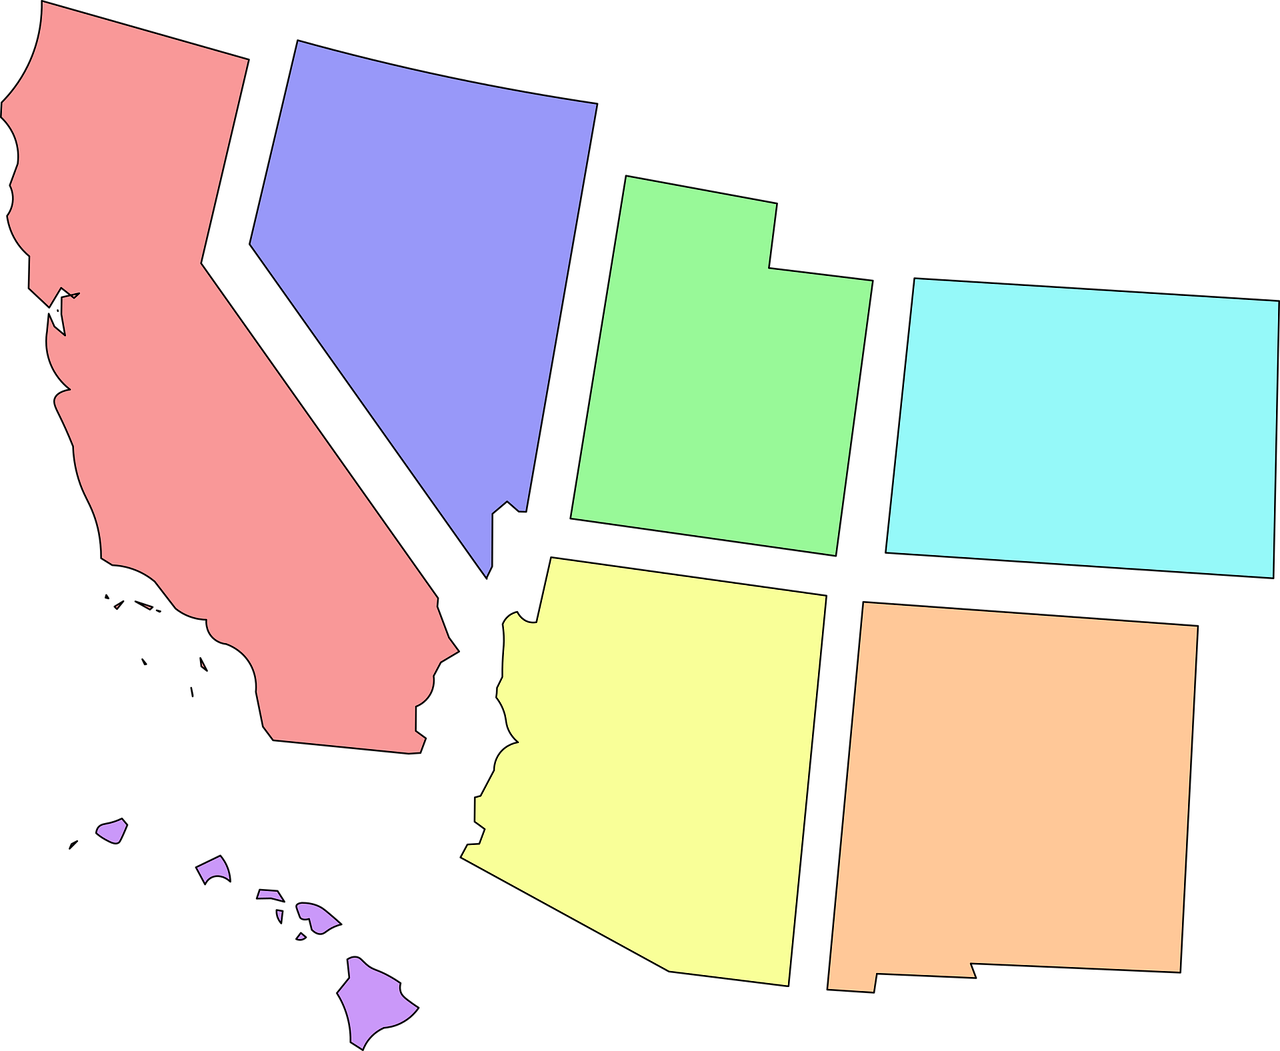 A Map Of California With Different Colored Squares